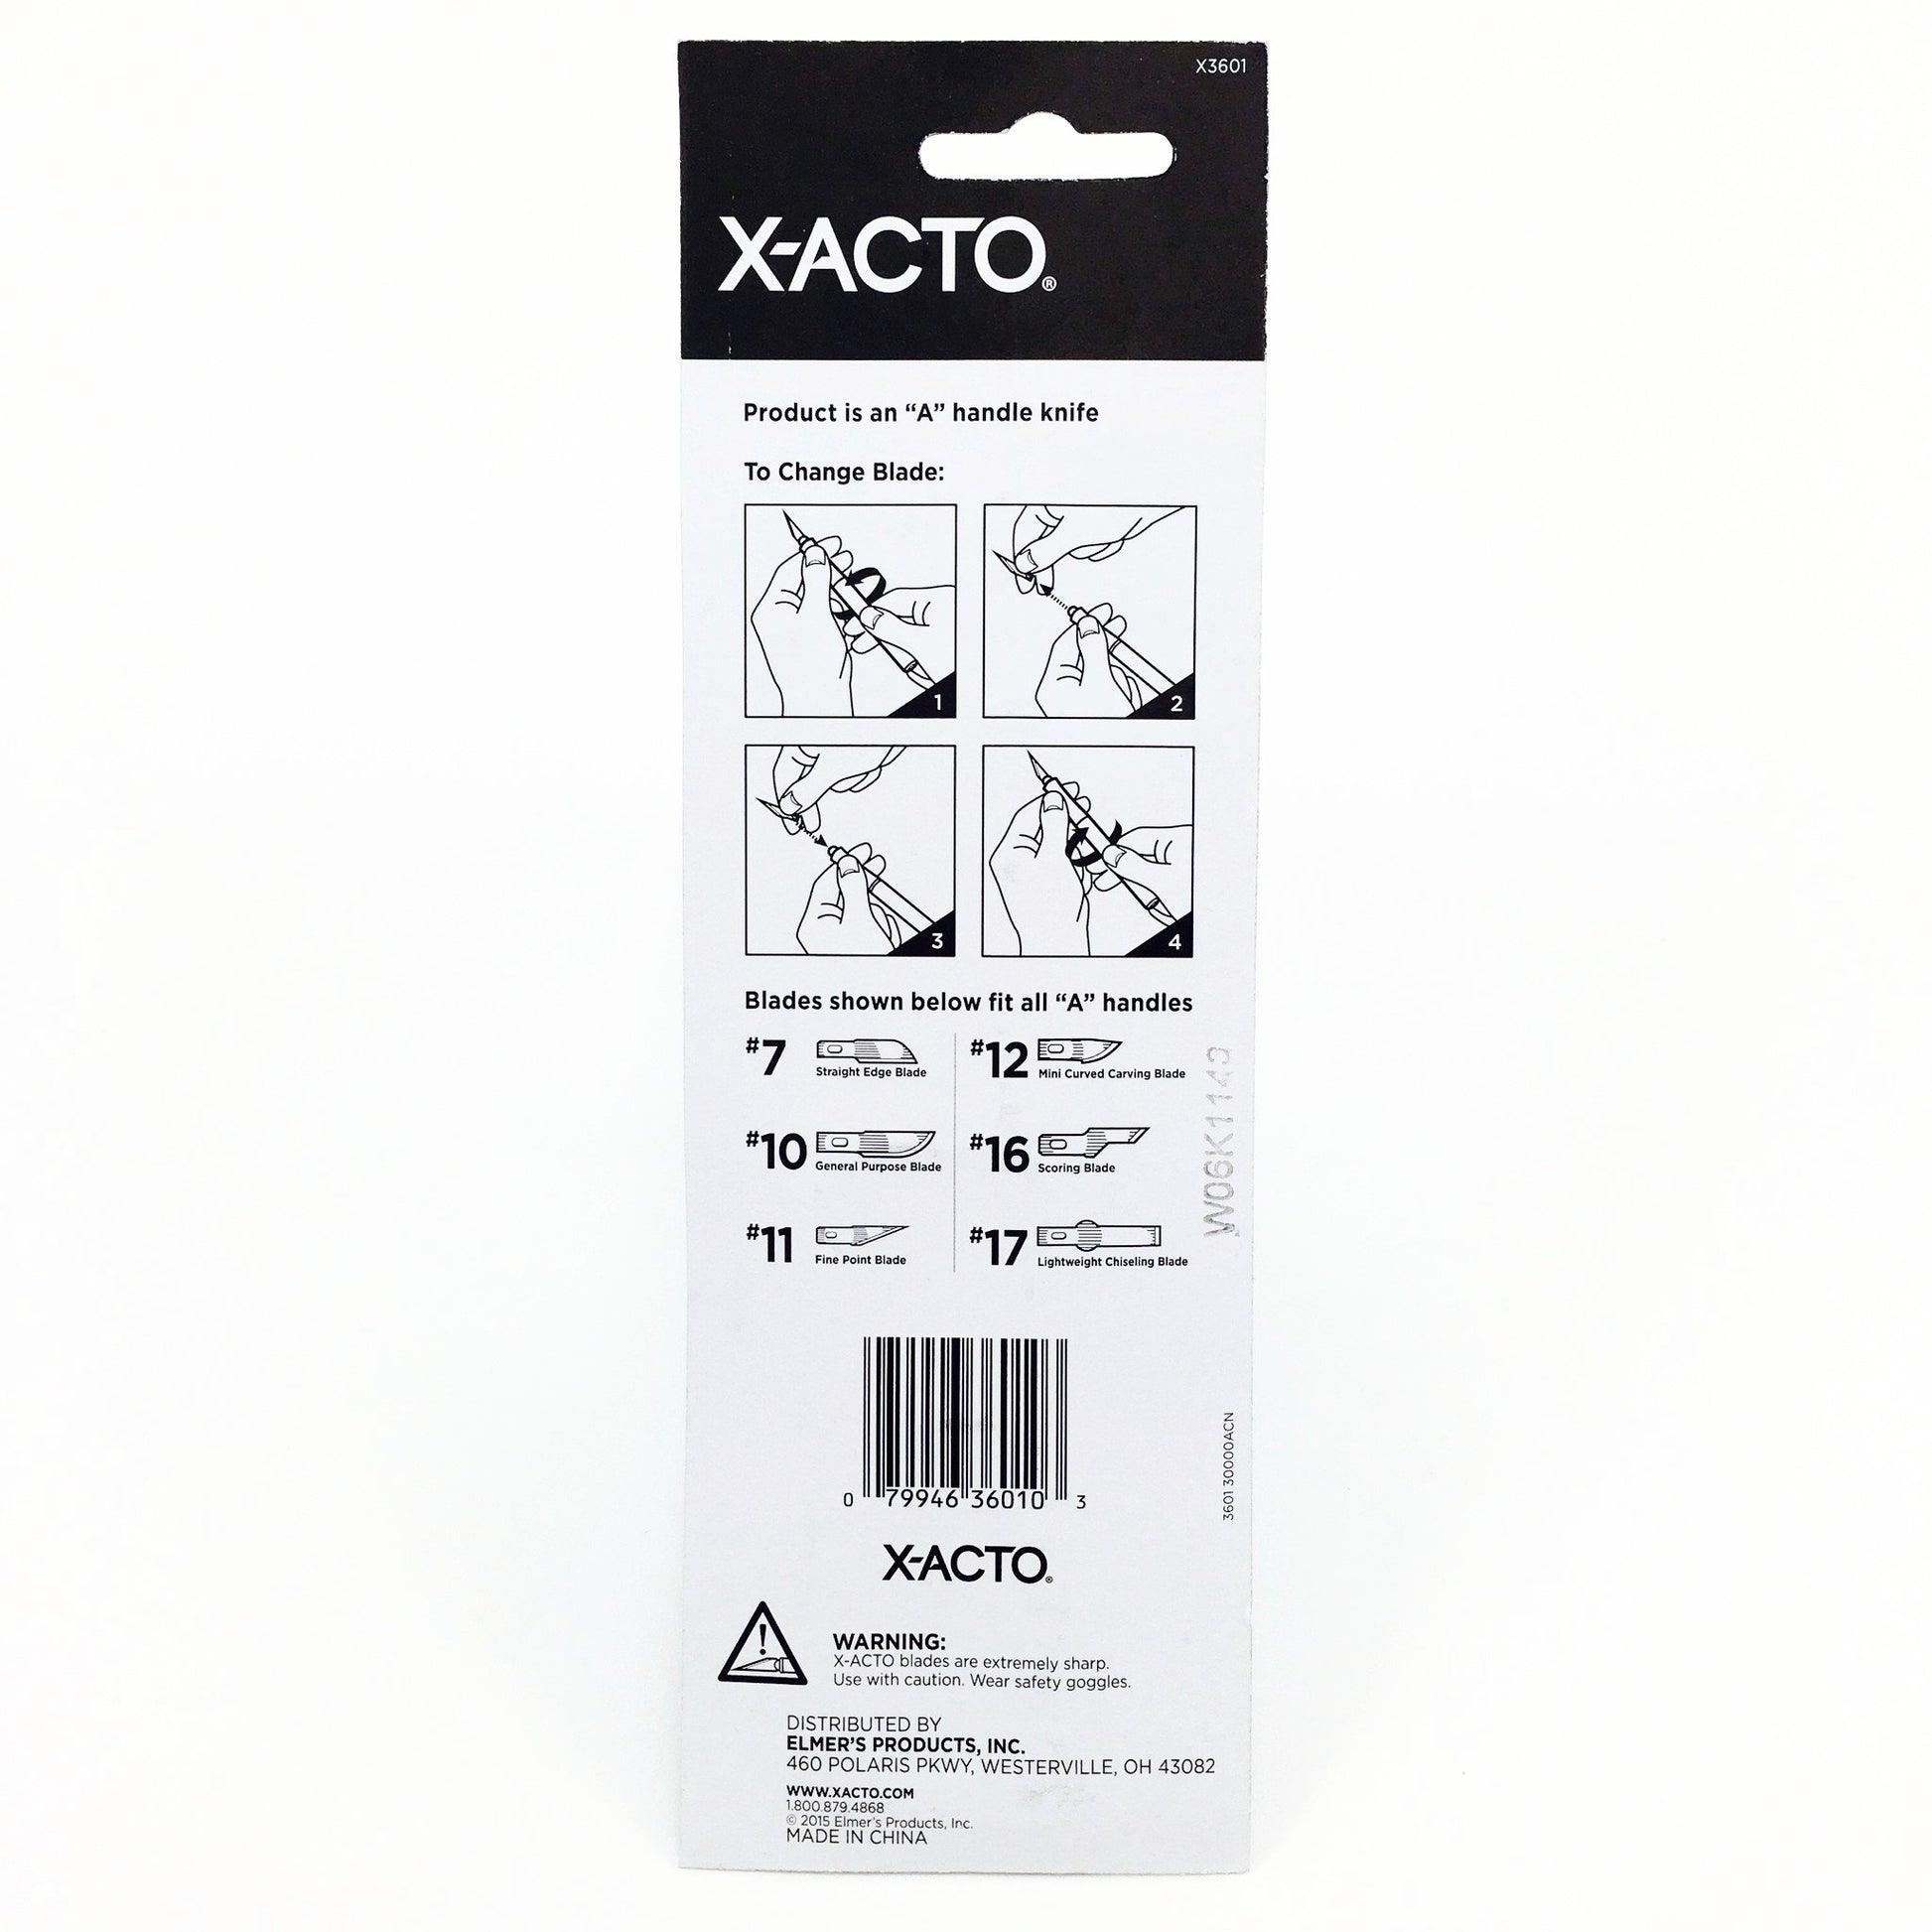 X-ACTO #1 Knife for precise cutting